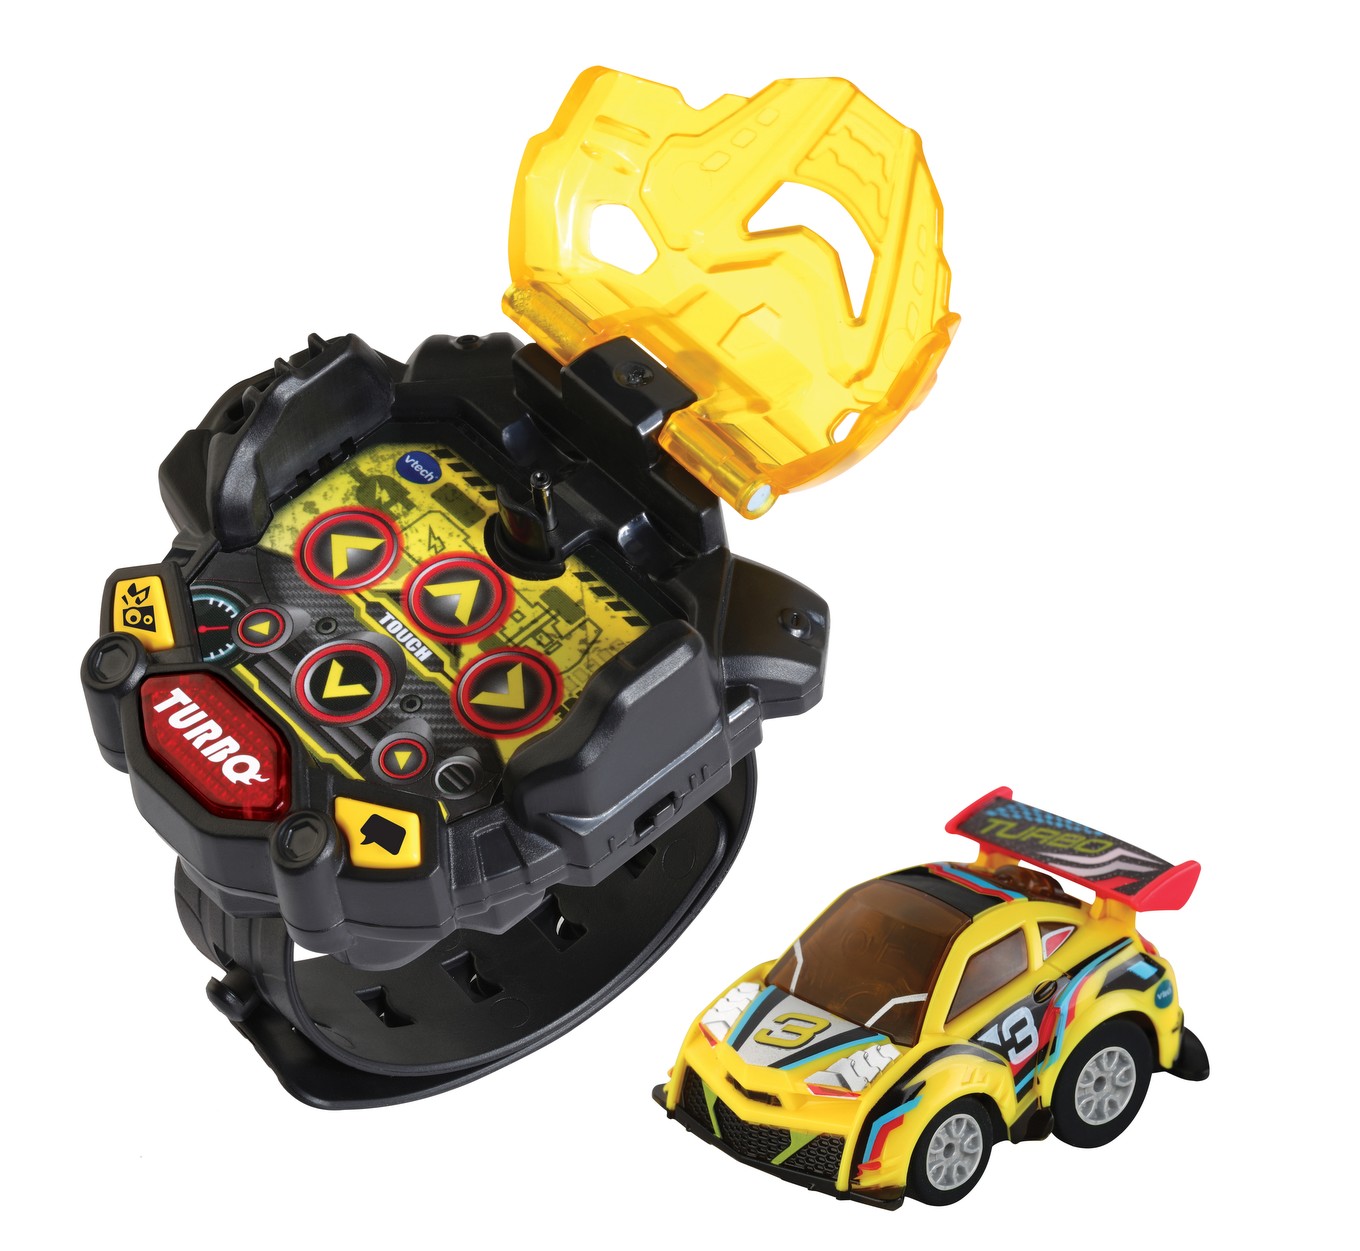 VTech Switch and Go Dinos Turbo is remote control fun for kids